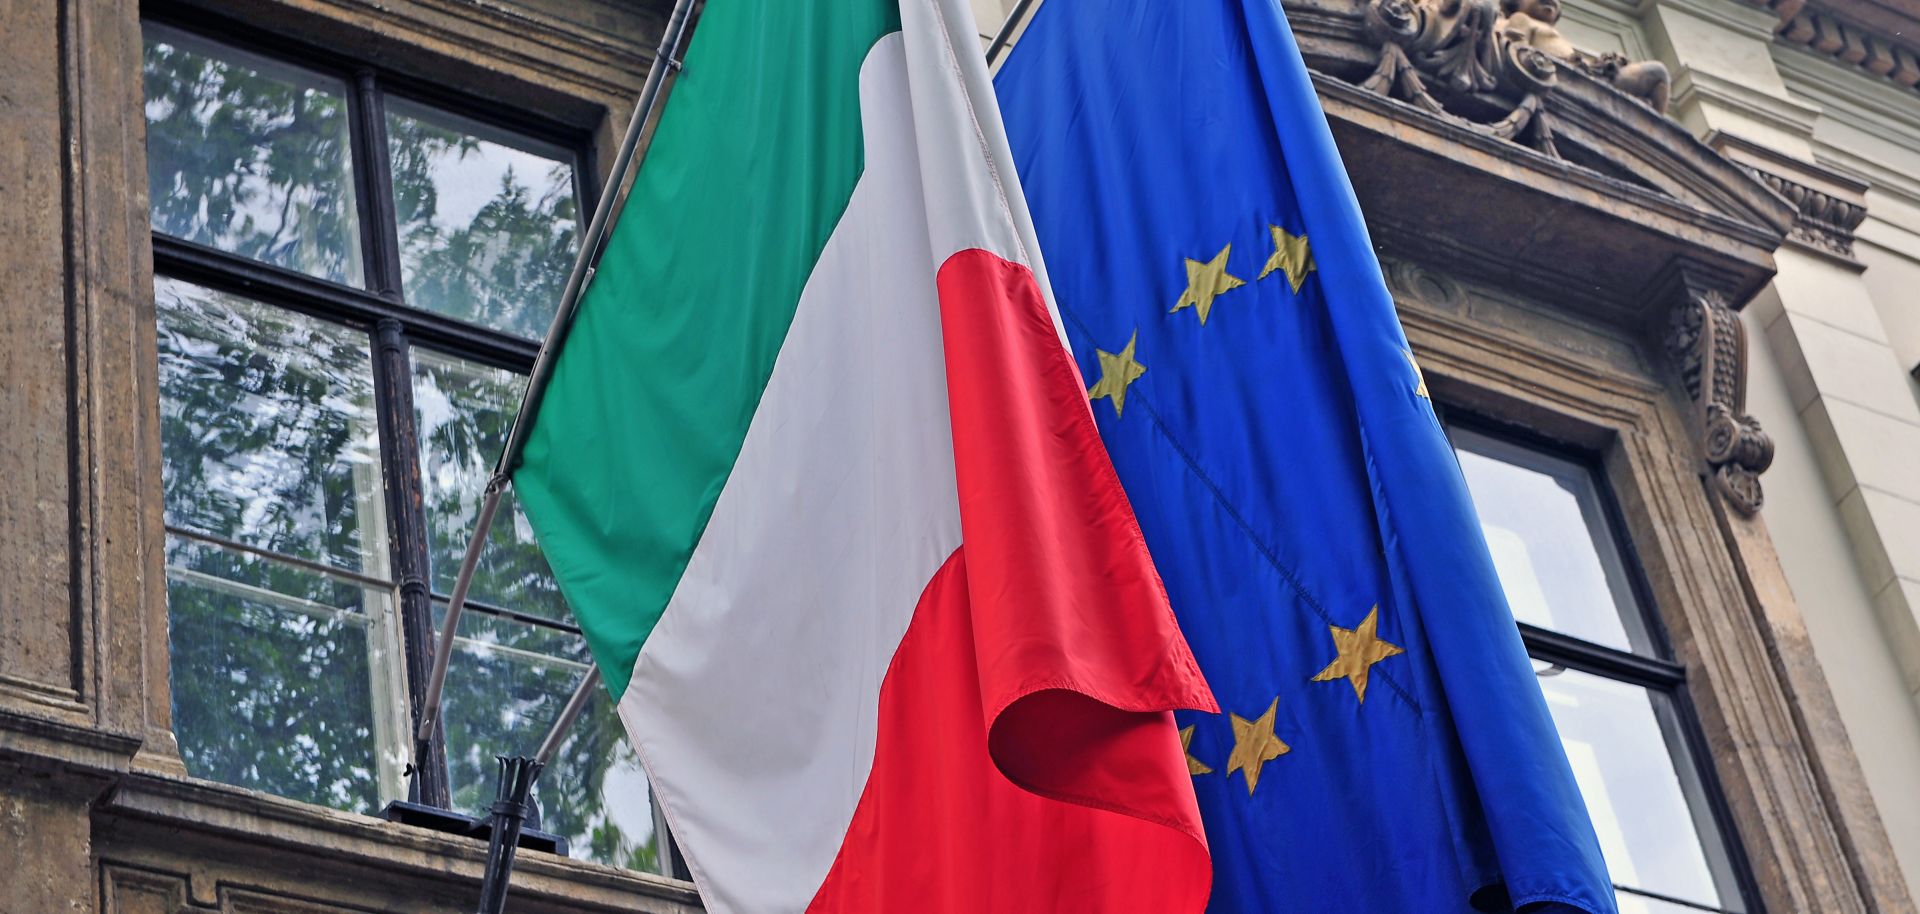 The Italian and EU flags hang side by side from the facade of a government building in Italy.